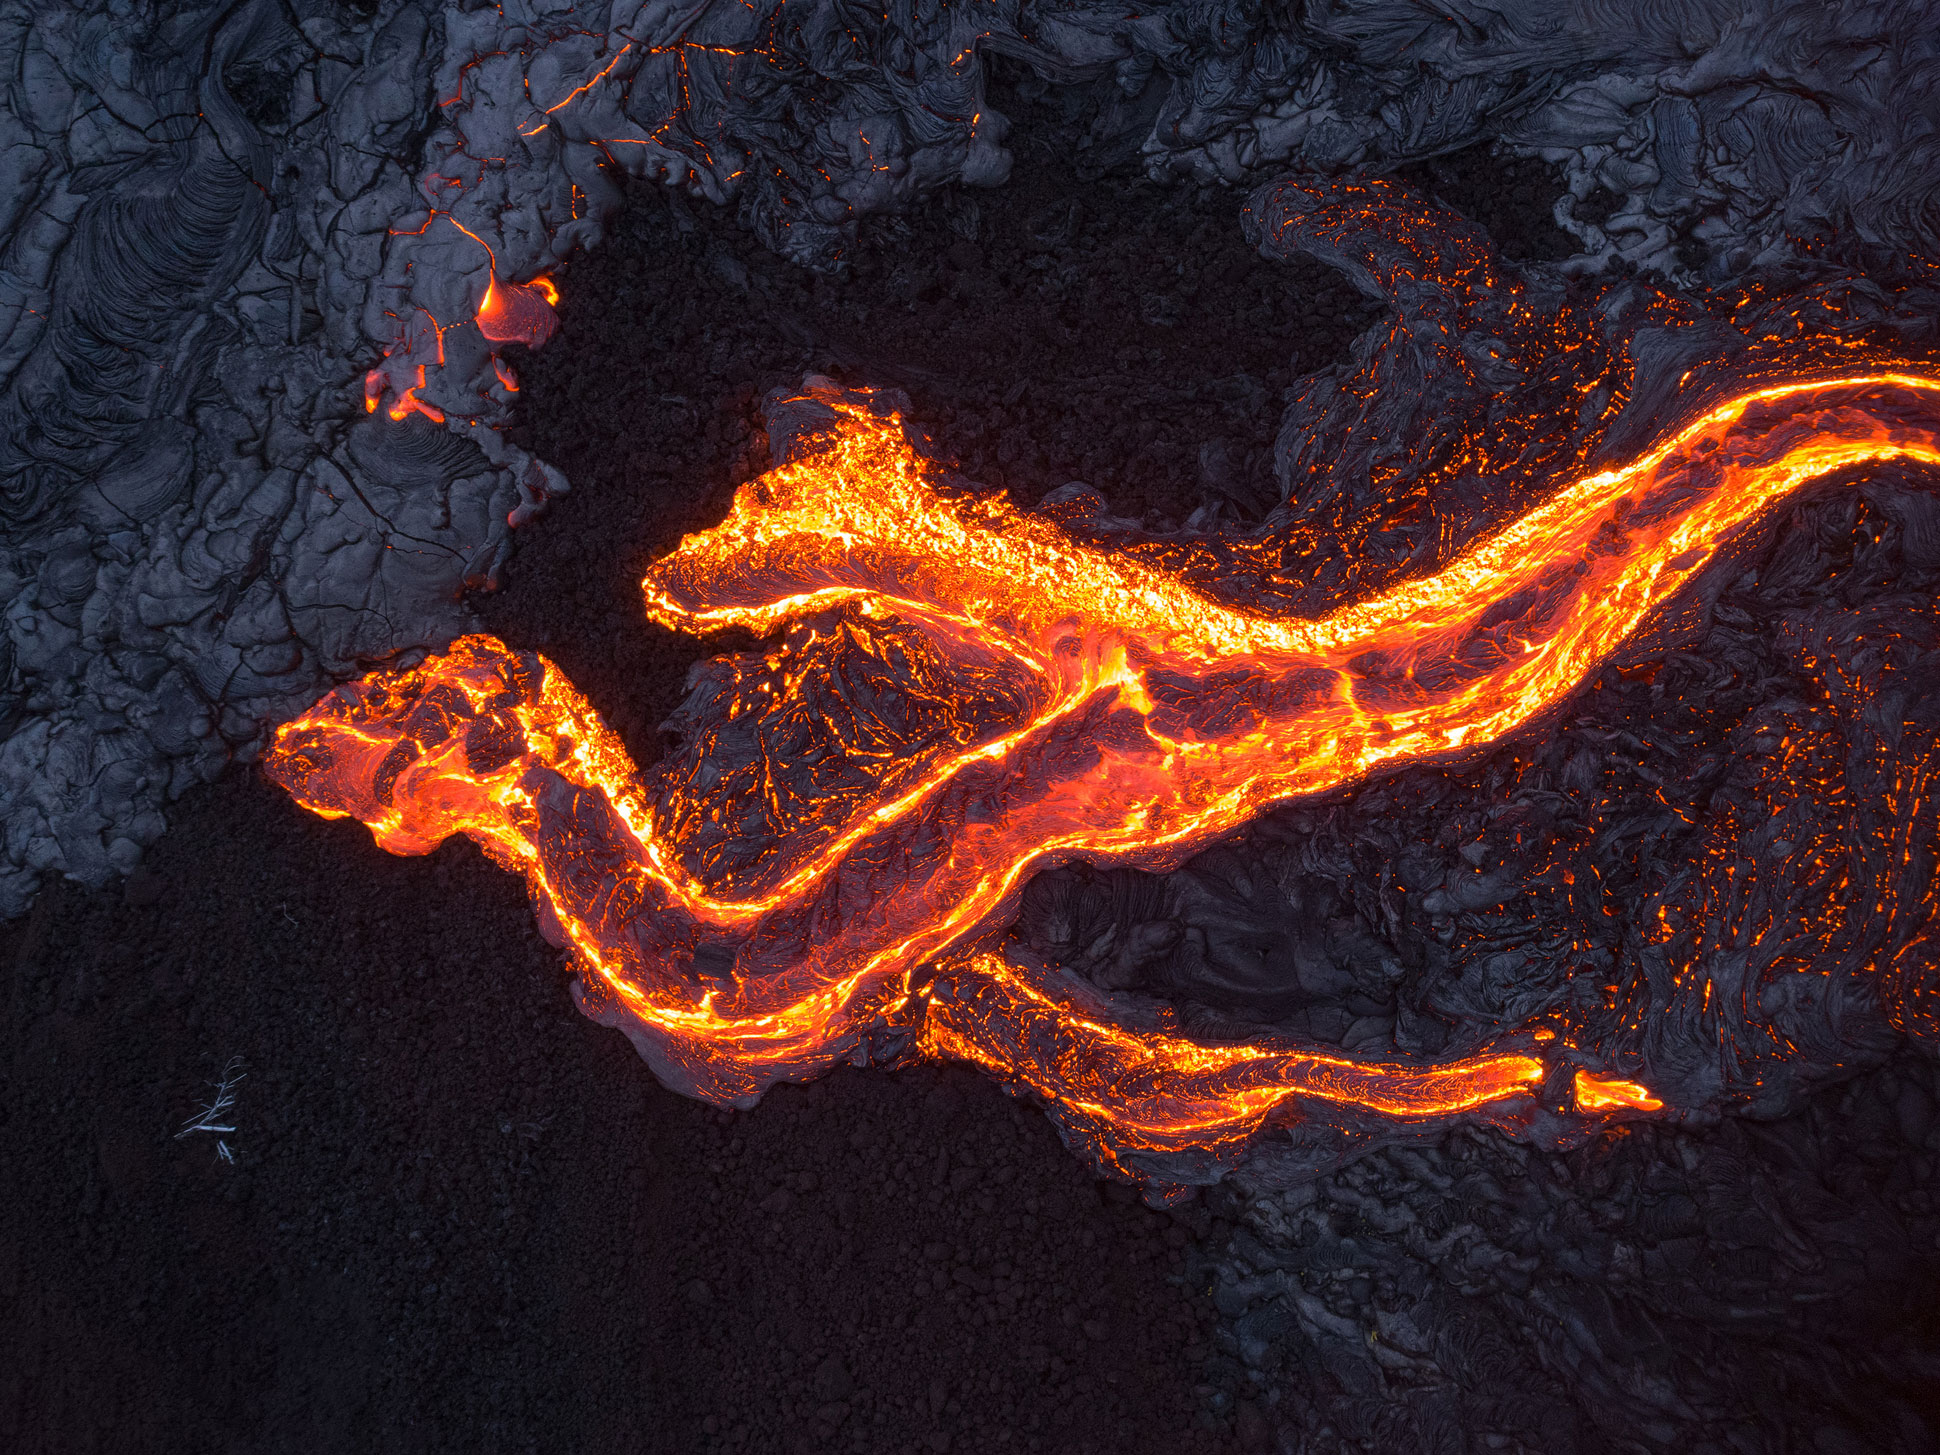 Mesmerizing Pictures of Lava Flows from the Kīlauea Volcano in Hawai'i